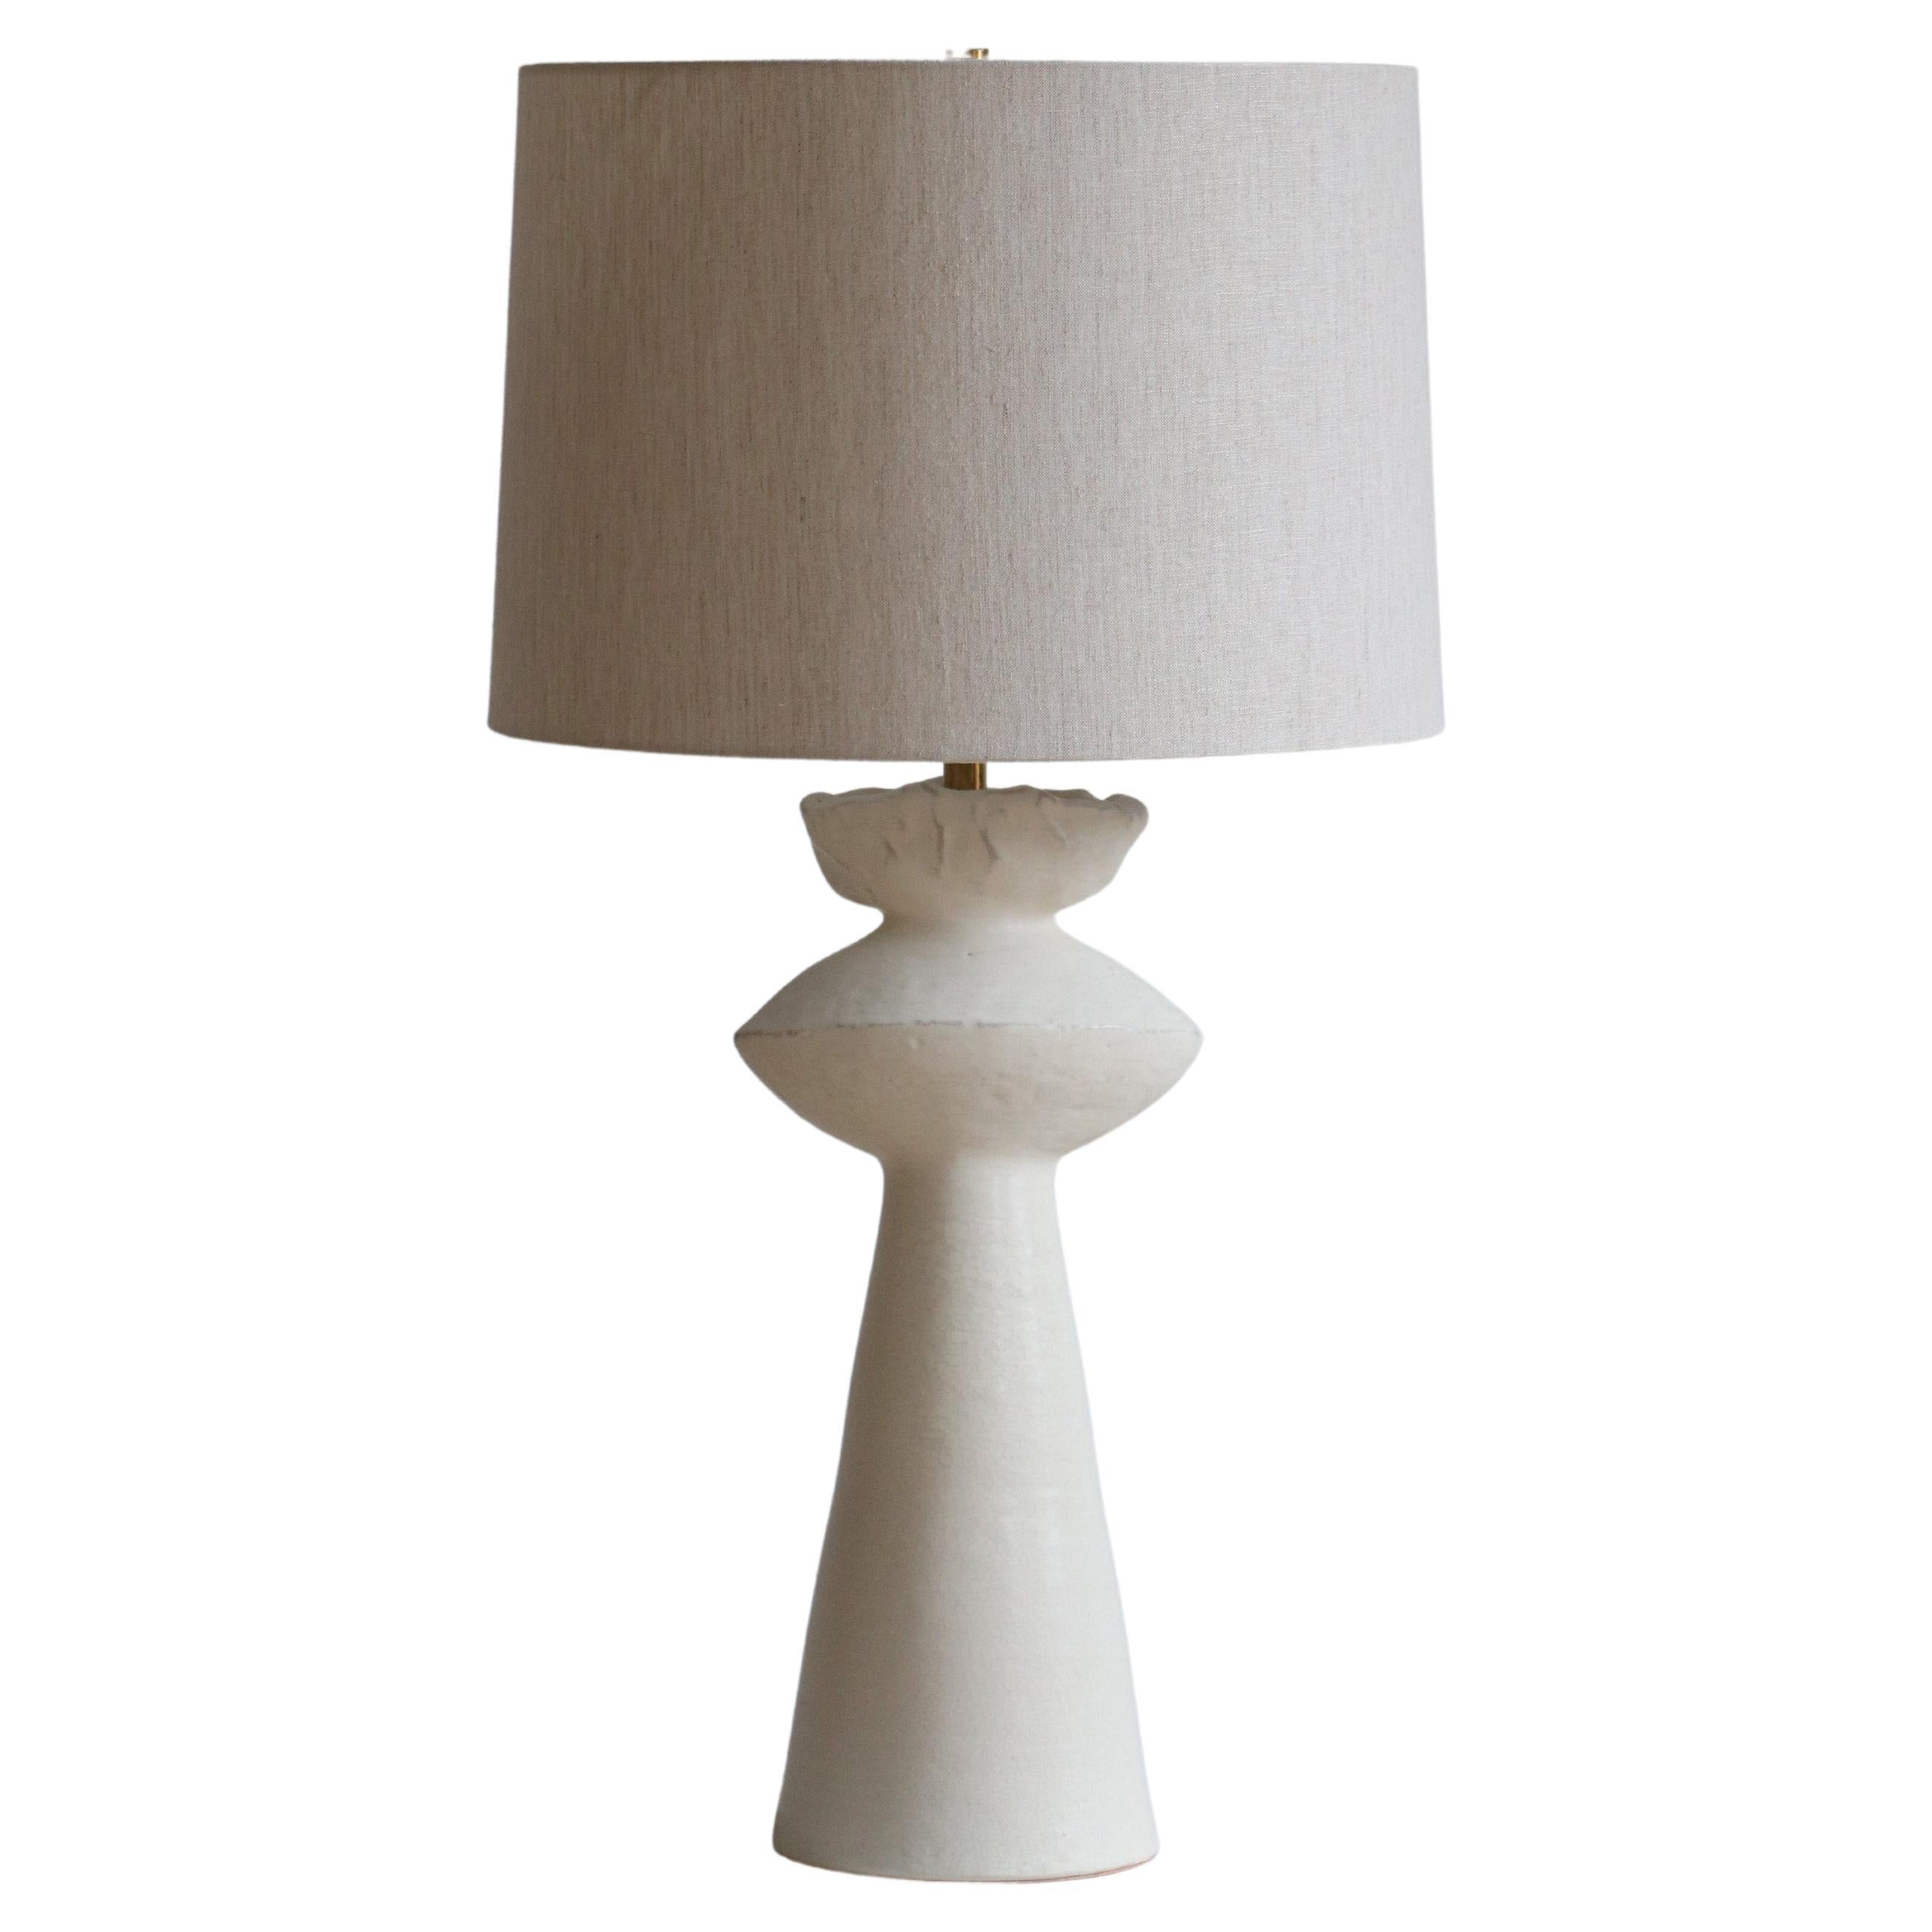 Stone Cicero 30 Table Lamp by  Danny Kaplan Studio For Sale